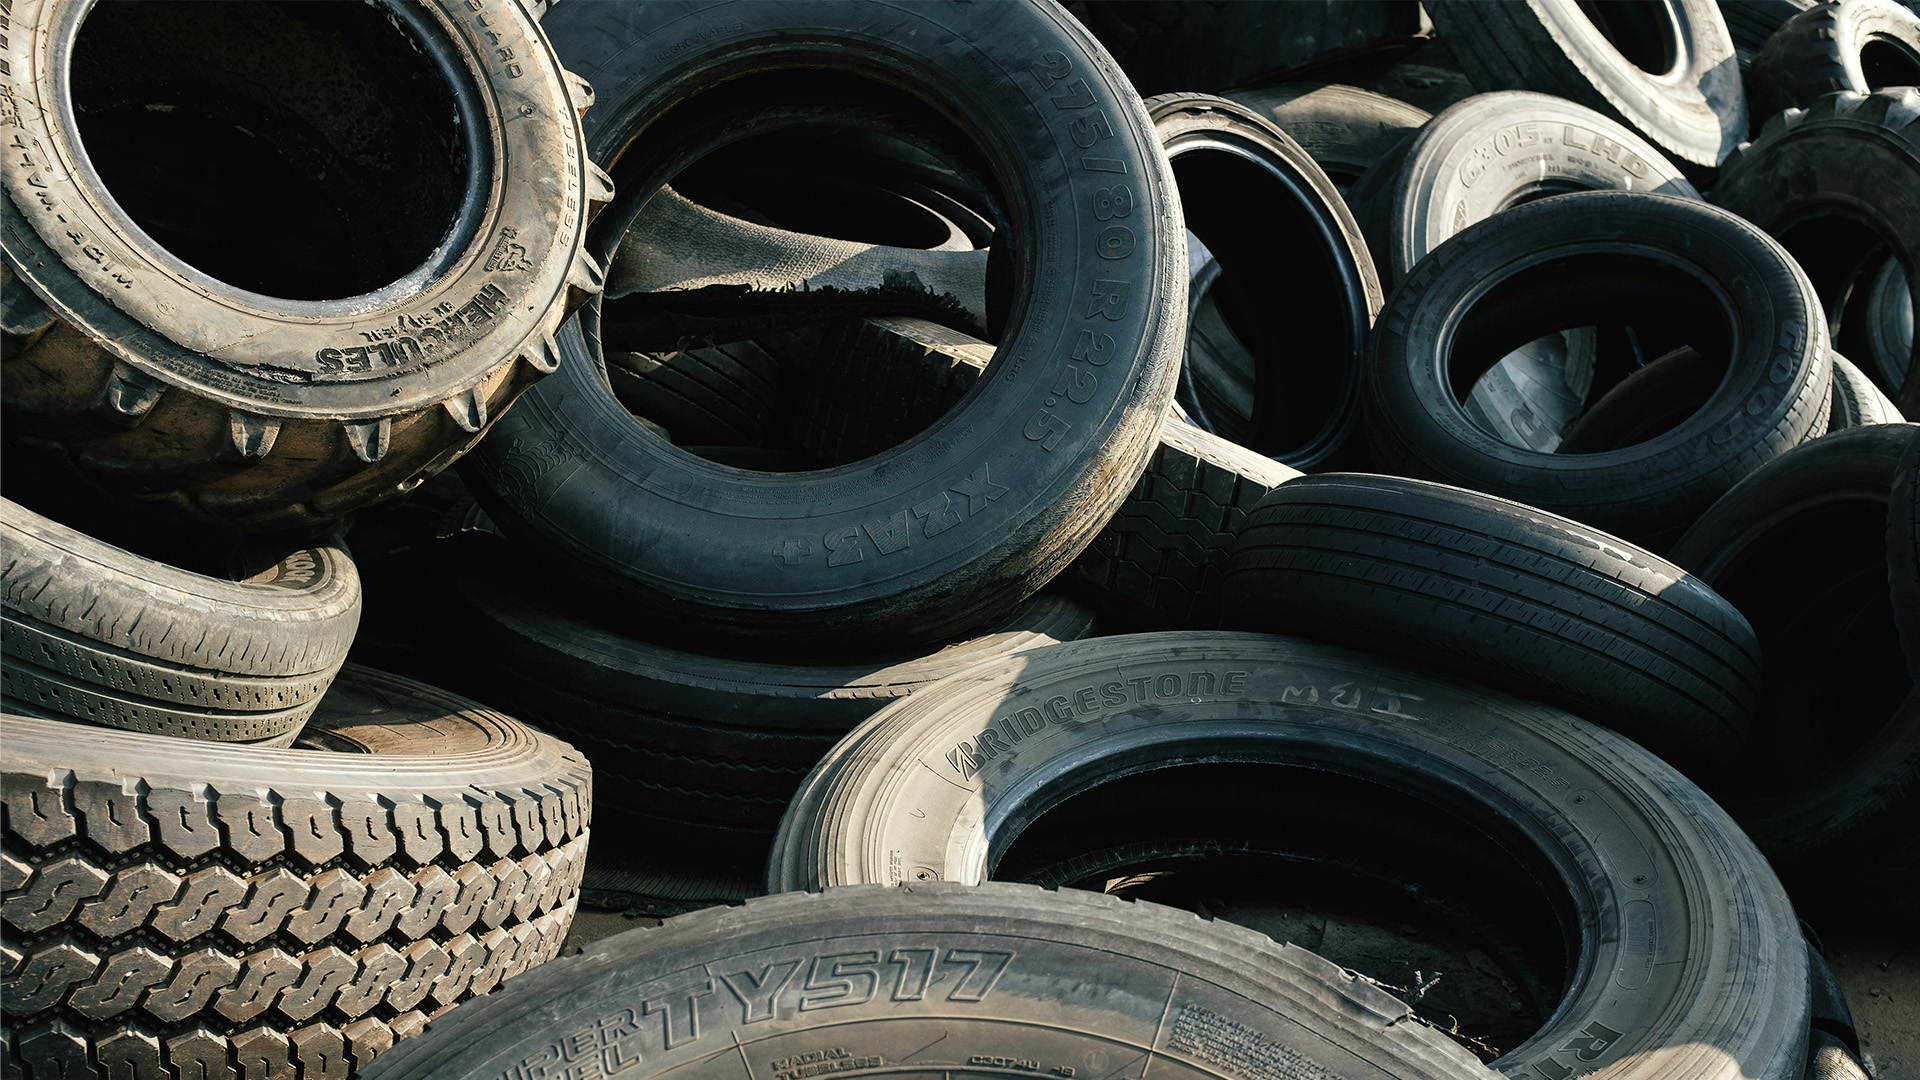 a pile of bald tires